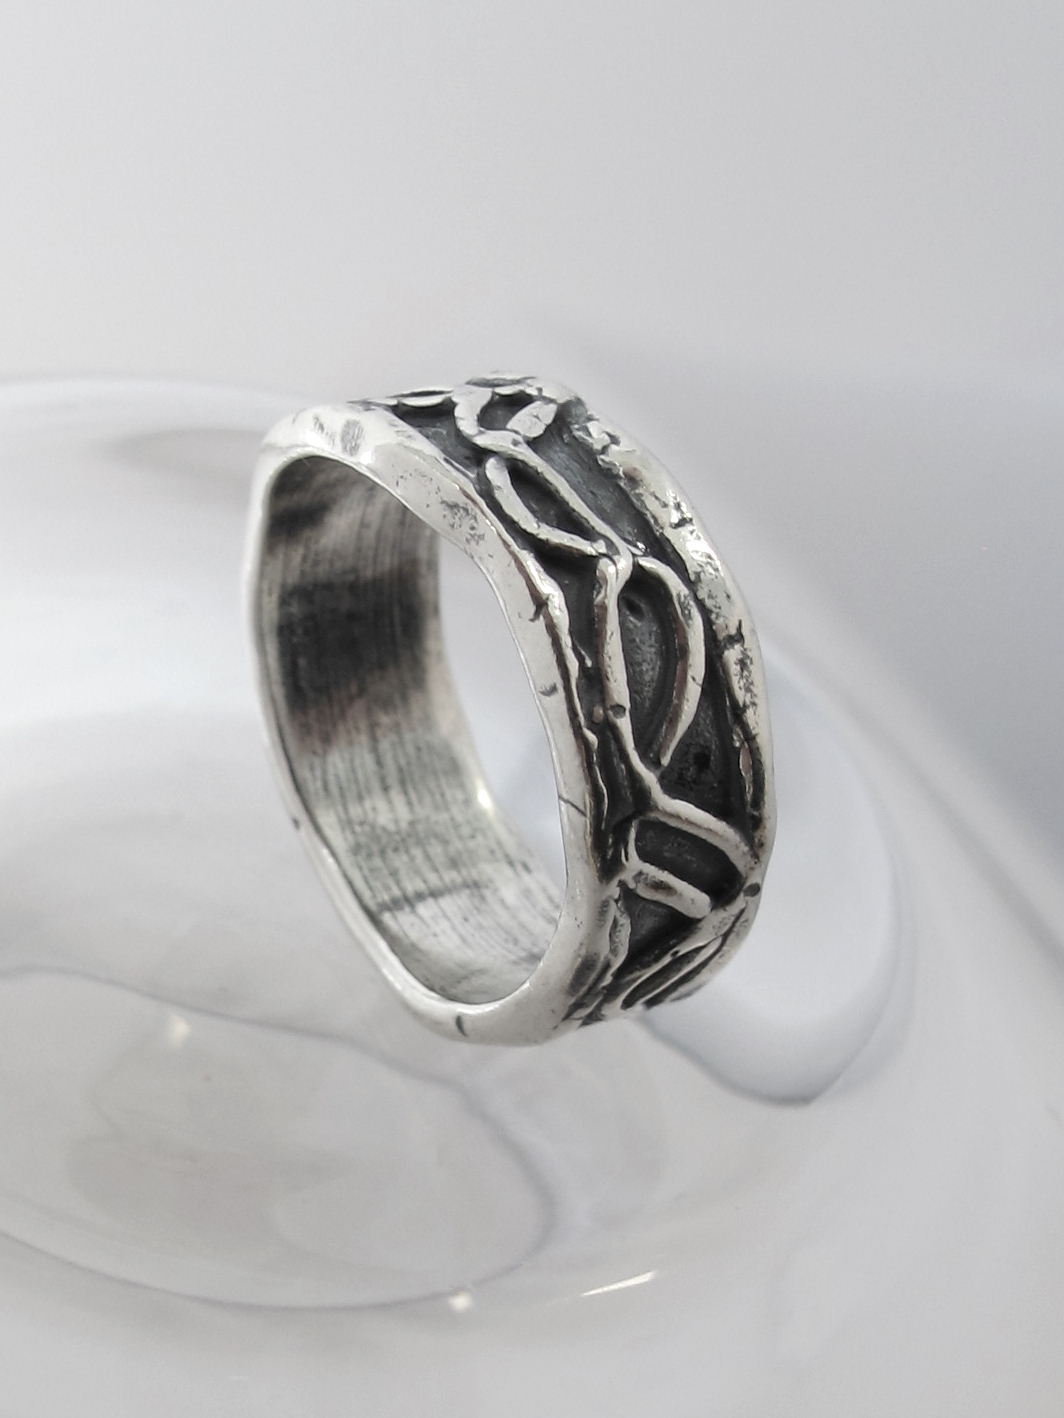 Claireworks Gallery — Rings by Claireworks